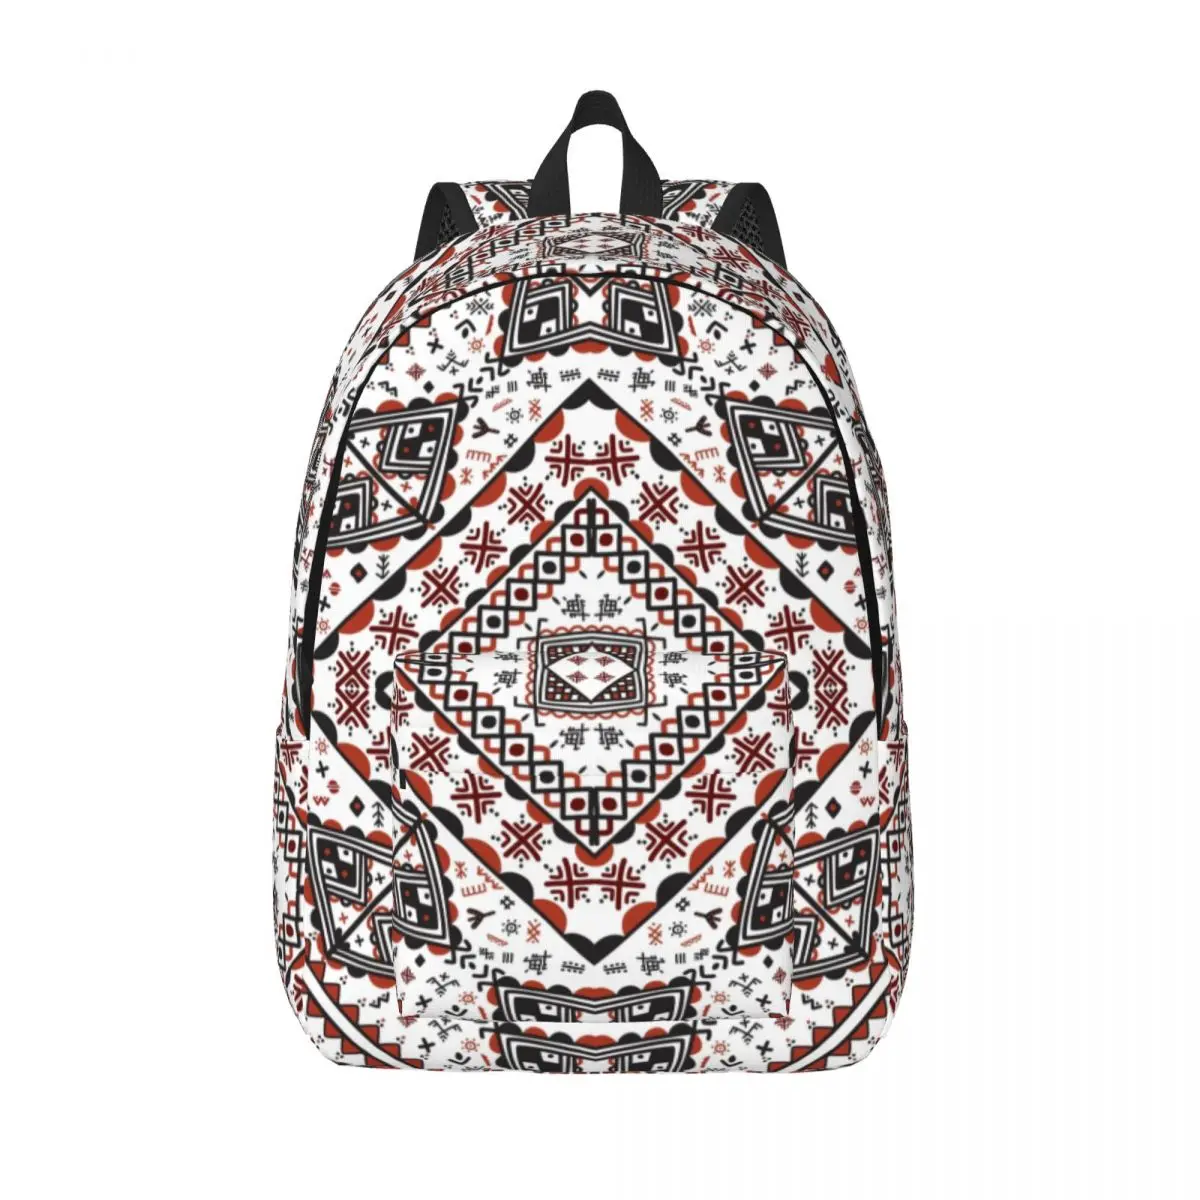 

Kabyle Pottery Berber Motifs Canvas Backpack Geometry Ethnic Berber College School Travel Bags Bookbag Fits 15 Inch Laptop